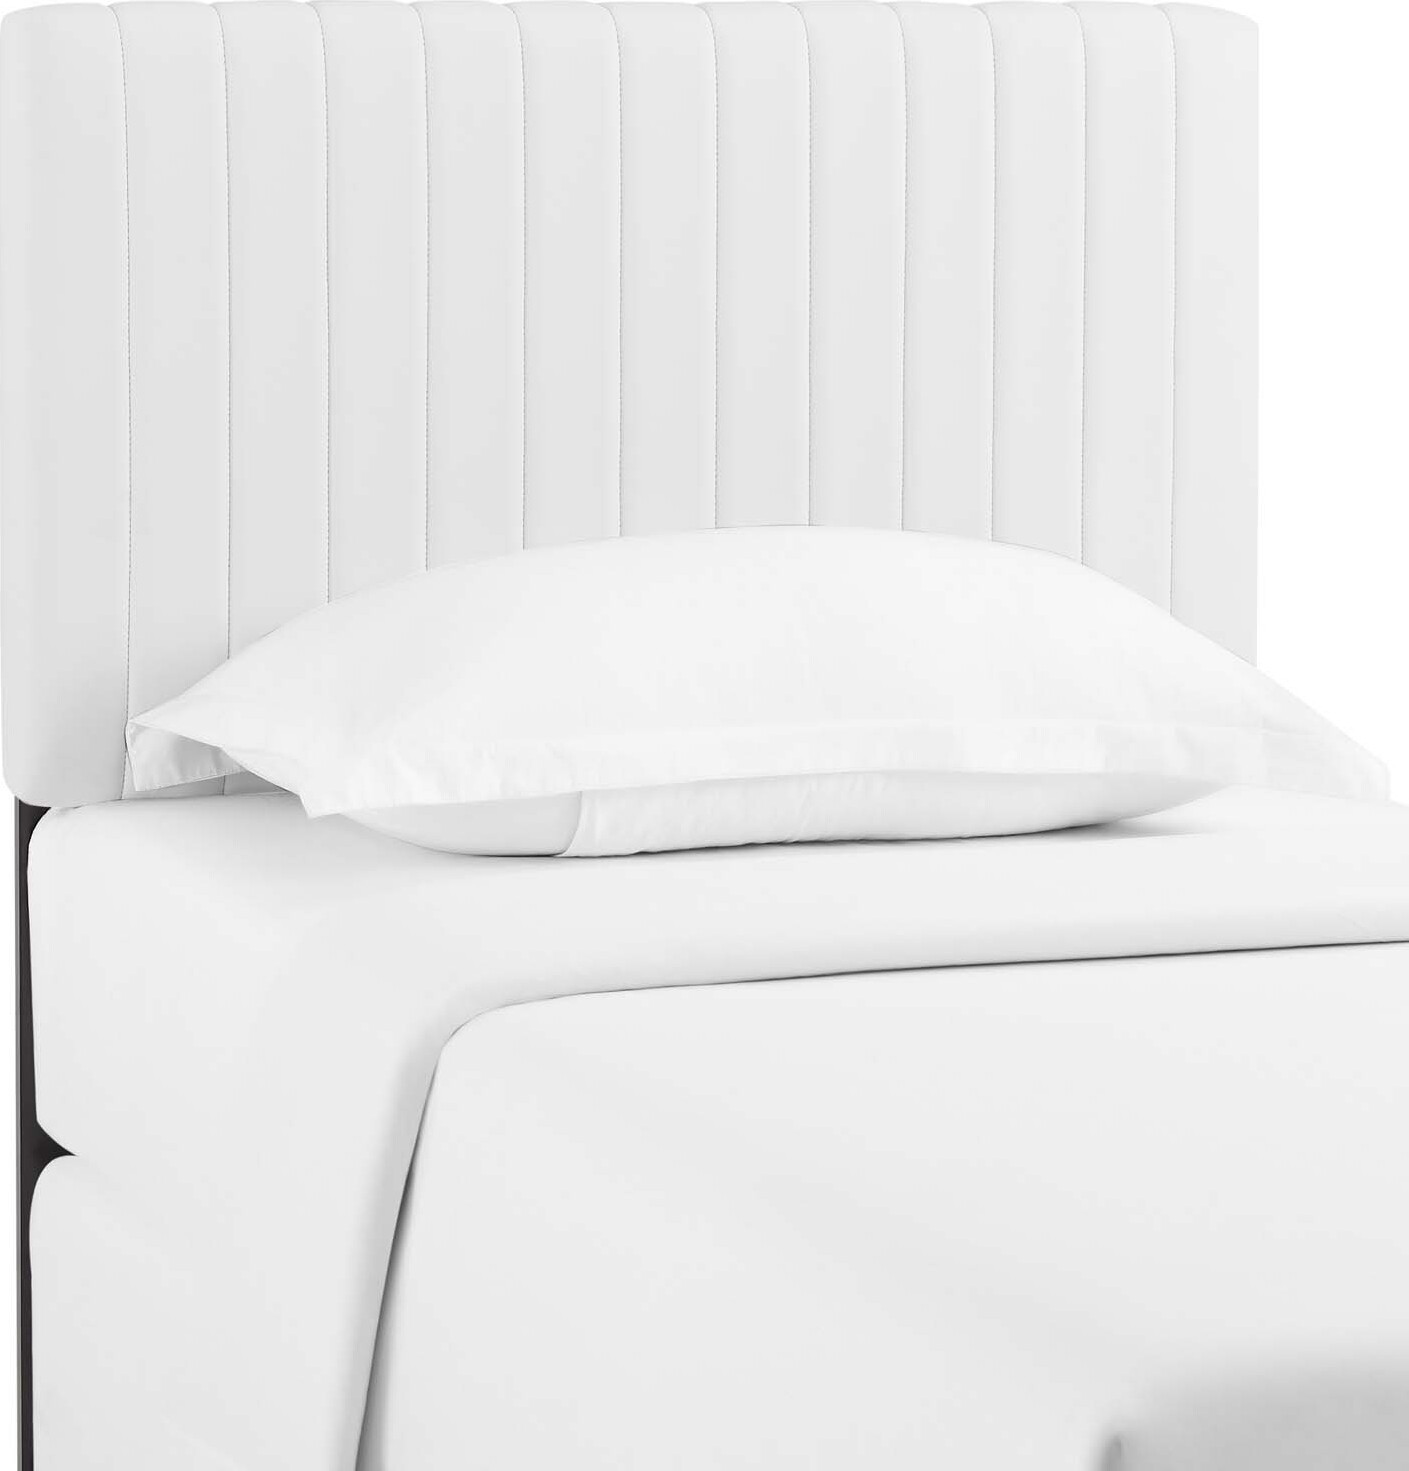 Keira White Twin Faux Leather Headboard, Twin Leather Bed Frame